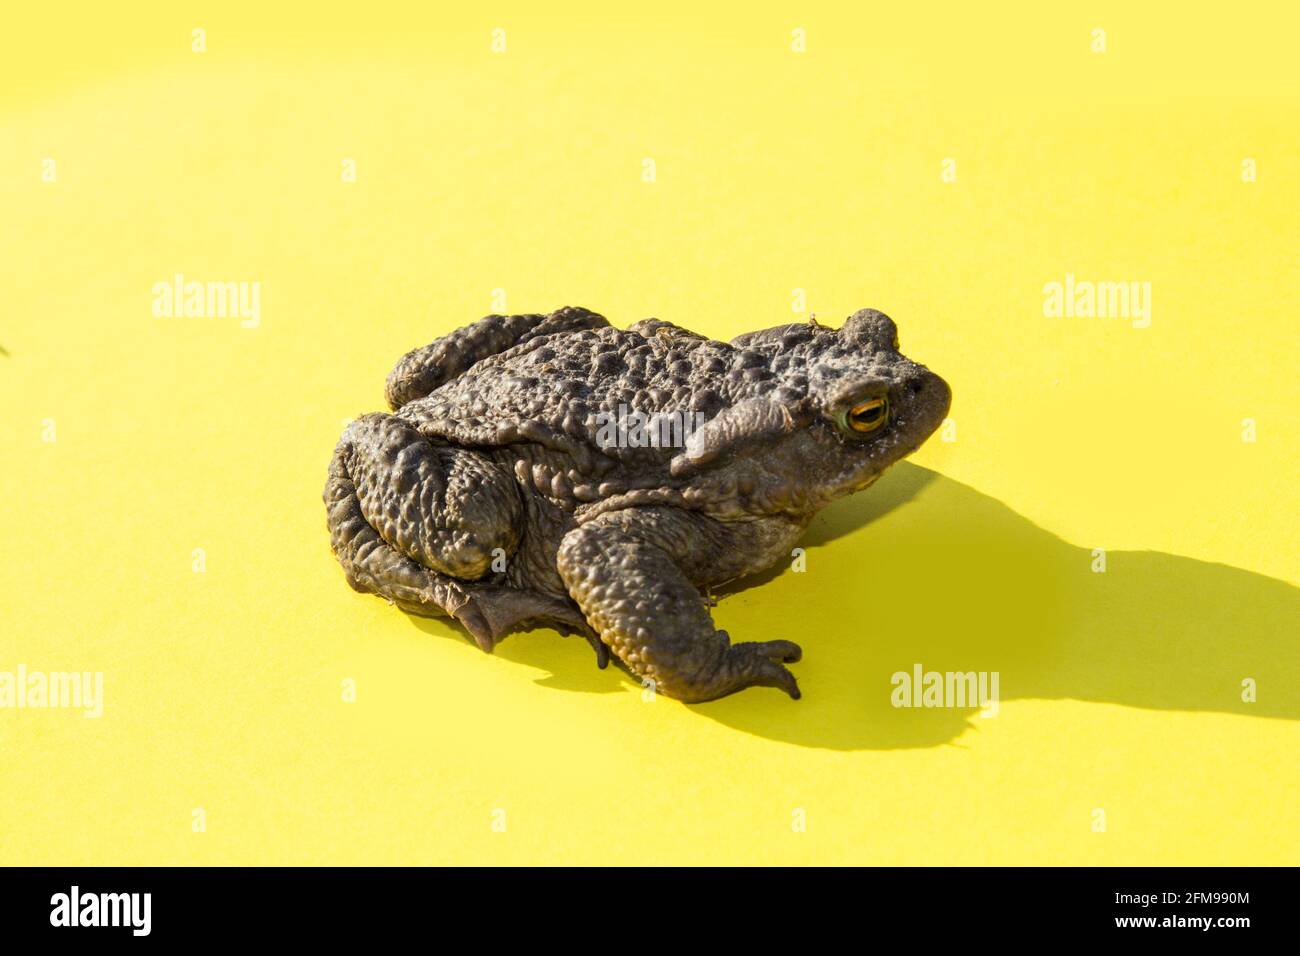 Large common water toad on a yellow background side view. Stock Photo